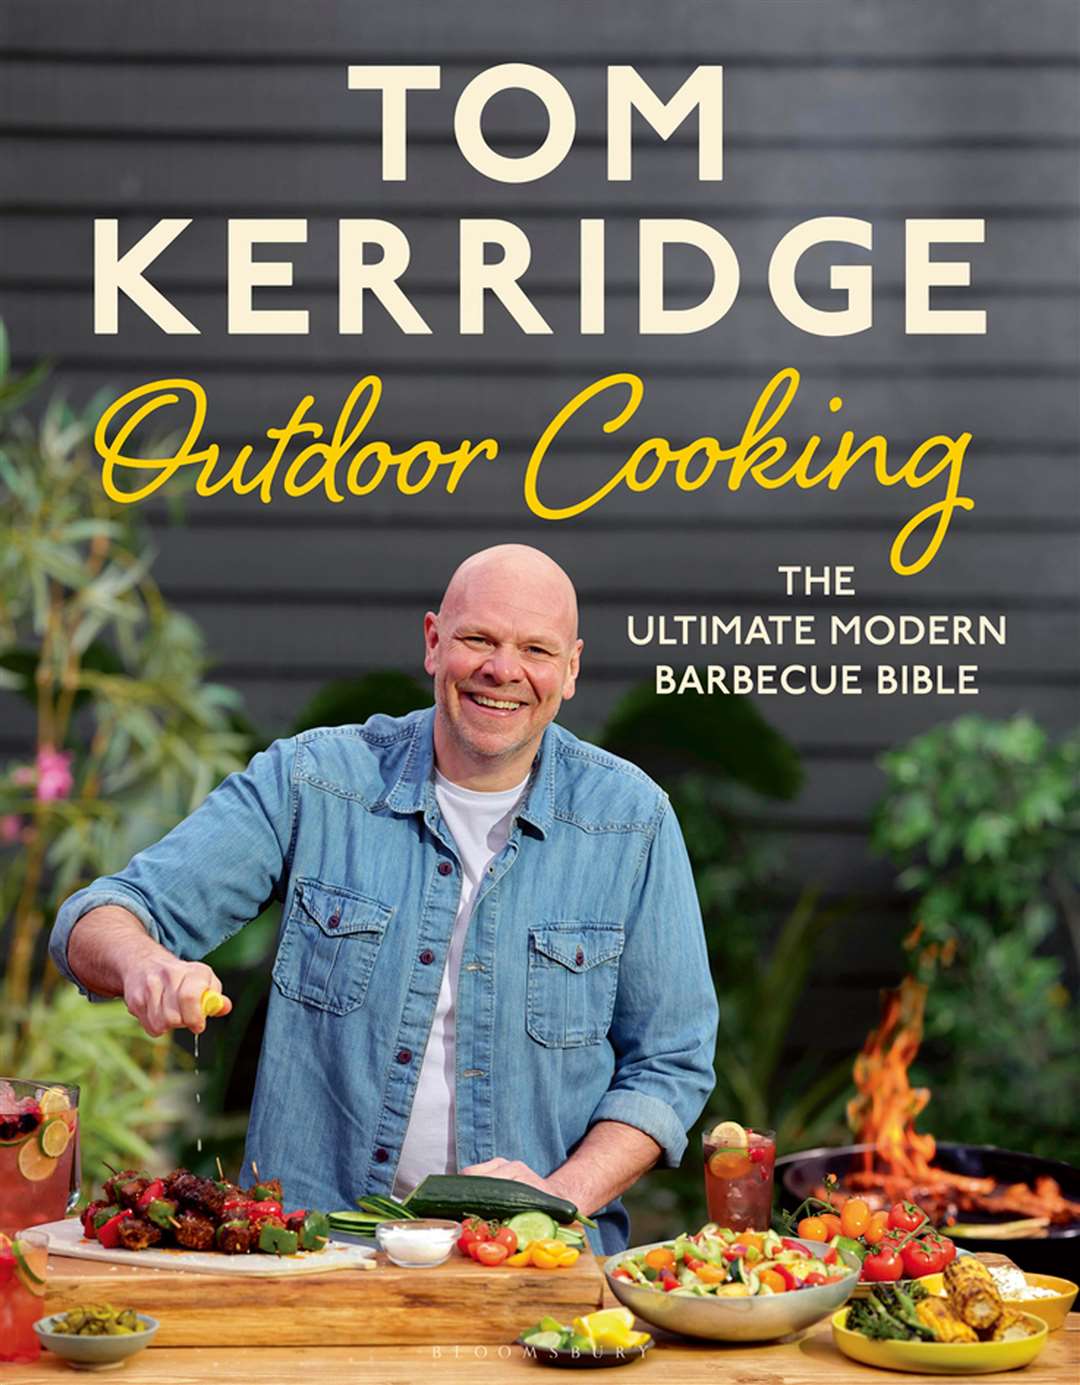 Outdoor Cooking: The Ultimate Modern Barbecue Bible by Tom Kerridge, photography by Cristian Barnett is published by Bloomsbury Absolute, priced £22. Picture: PA Photo/Cristian Barnett